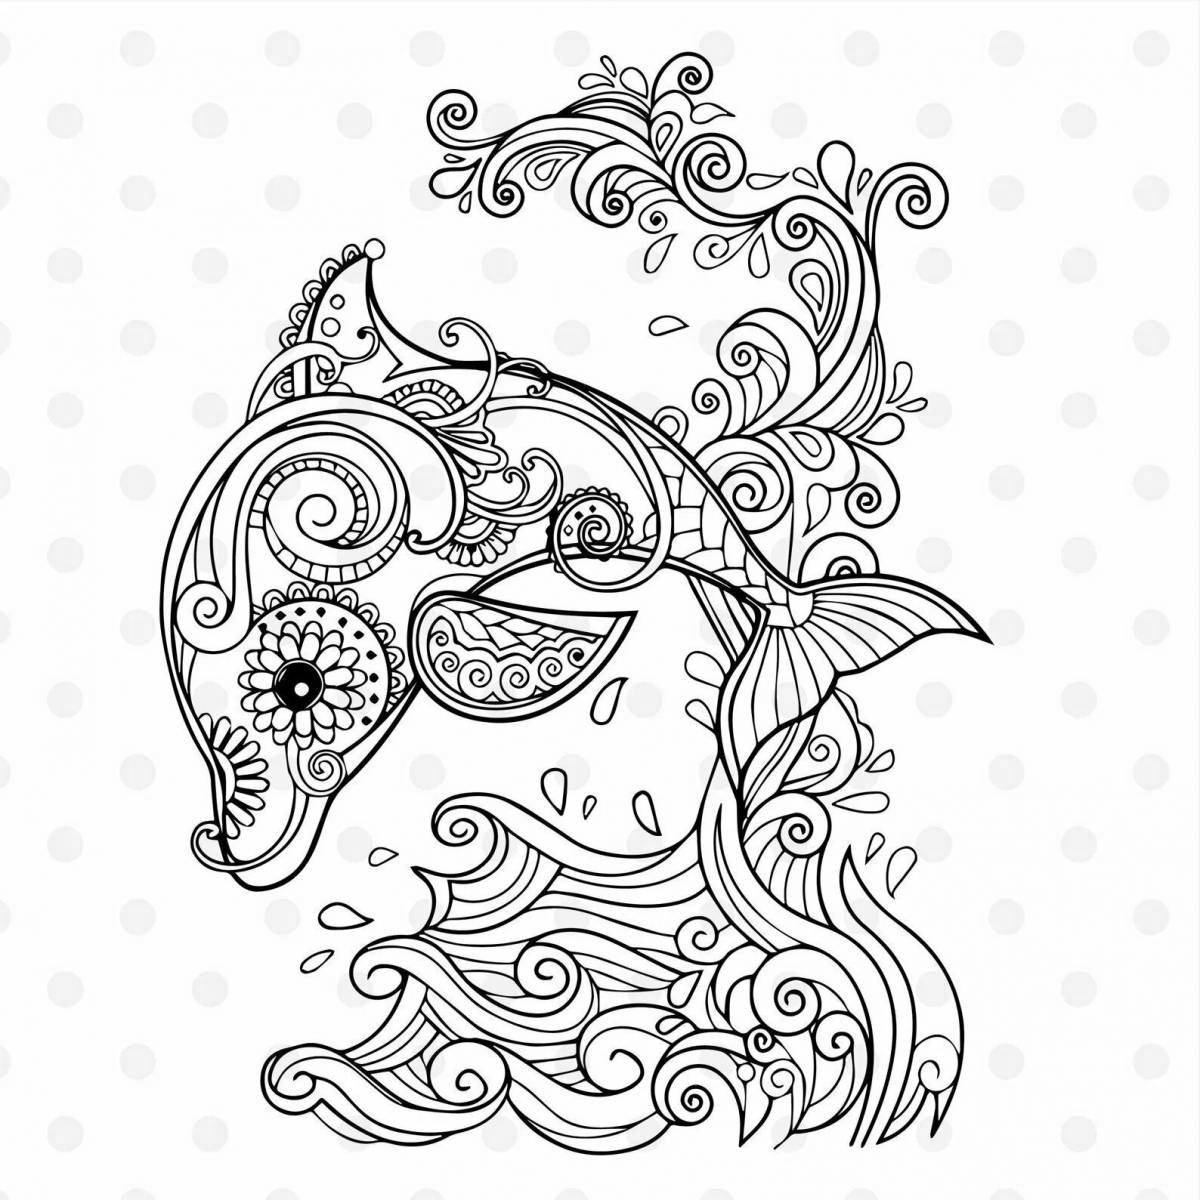 Amazing coloring pages relaxing living patterns